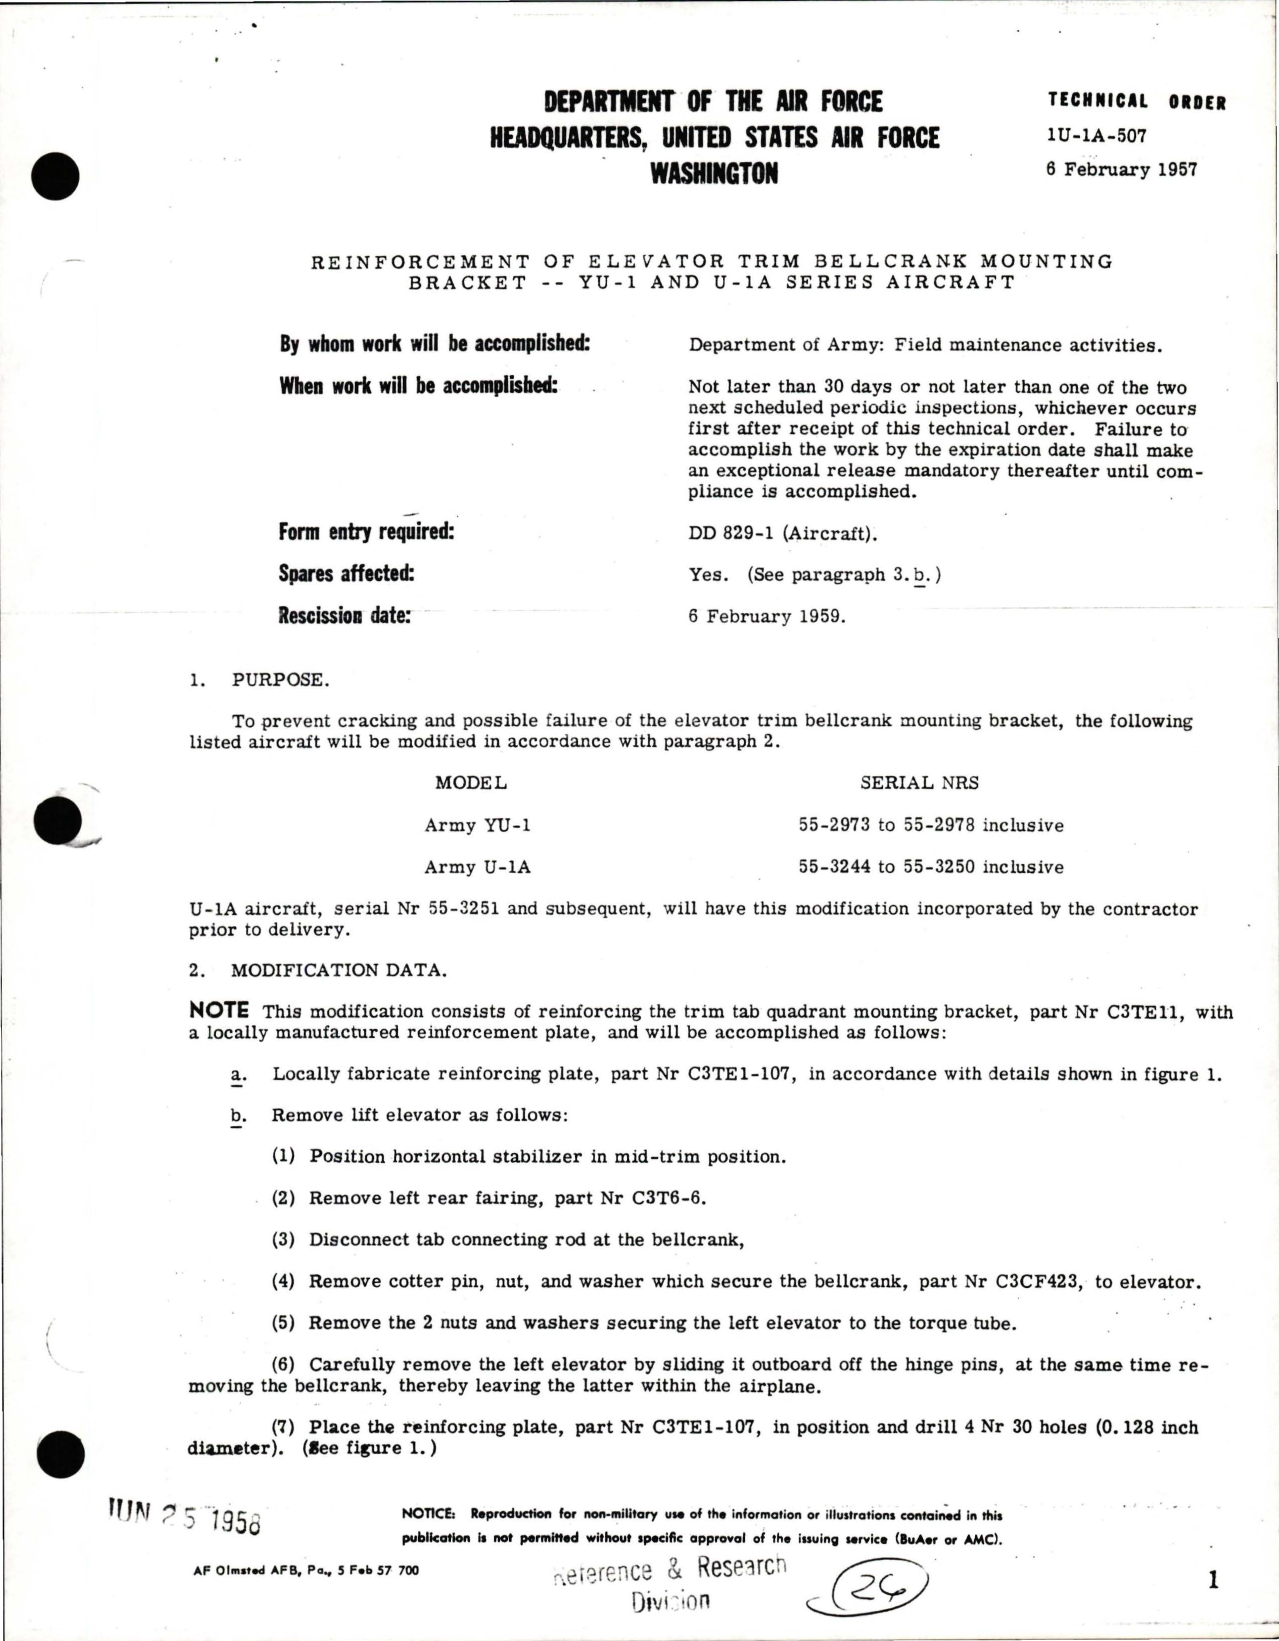 Sample page 1 from AirCorps Library document: Reinforcement of Elevator Trim Bellcrank Mounting Bracket for YU-1 and U-1A